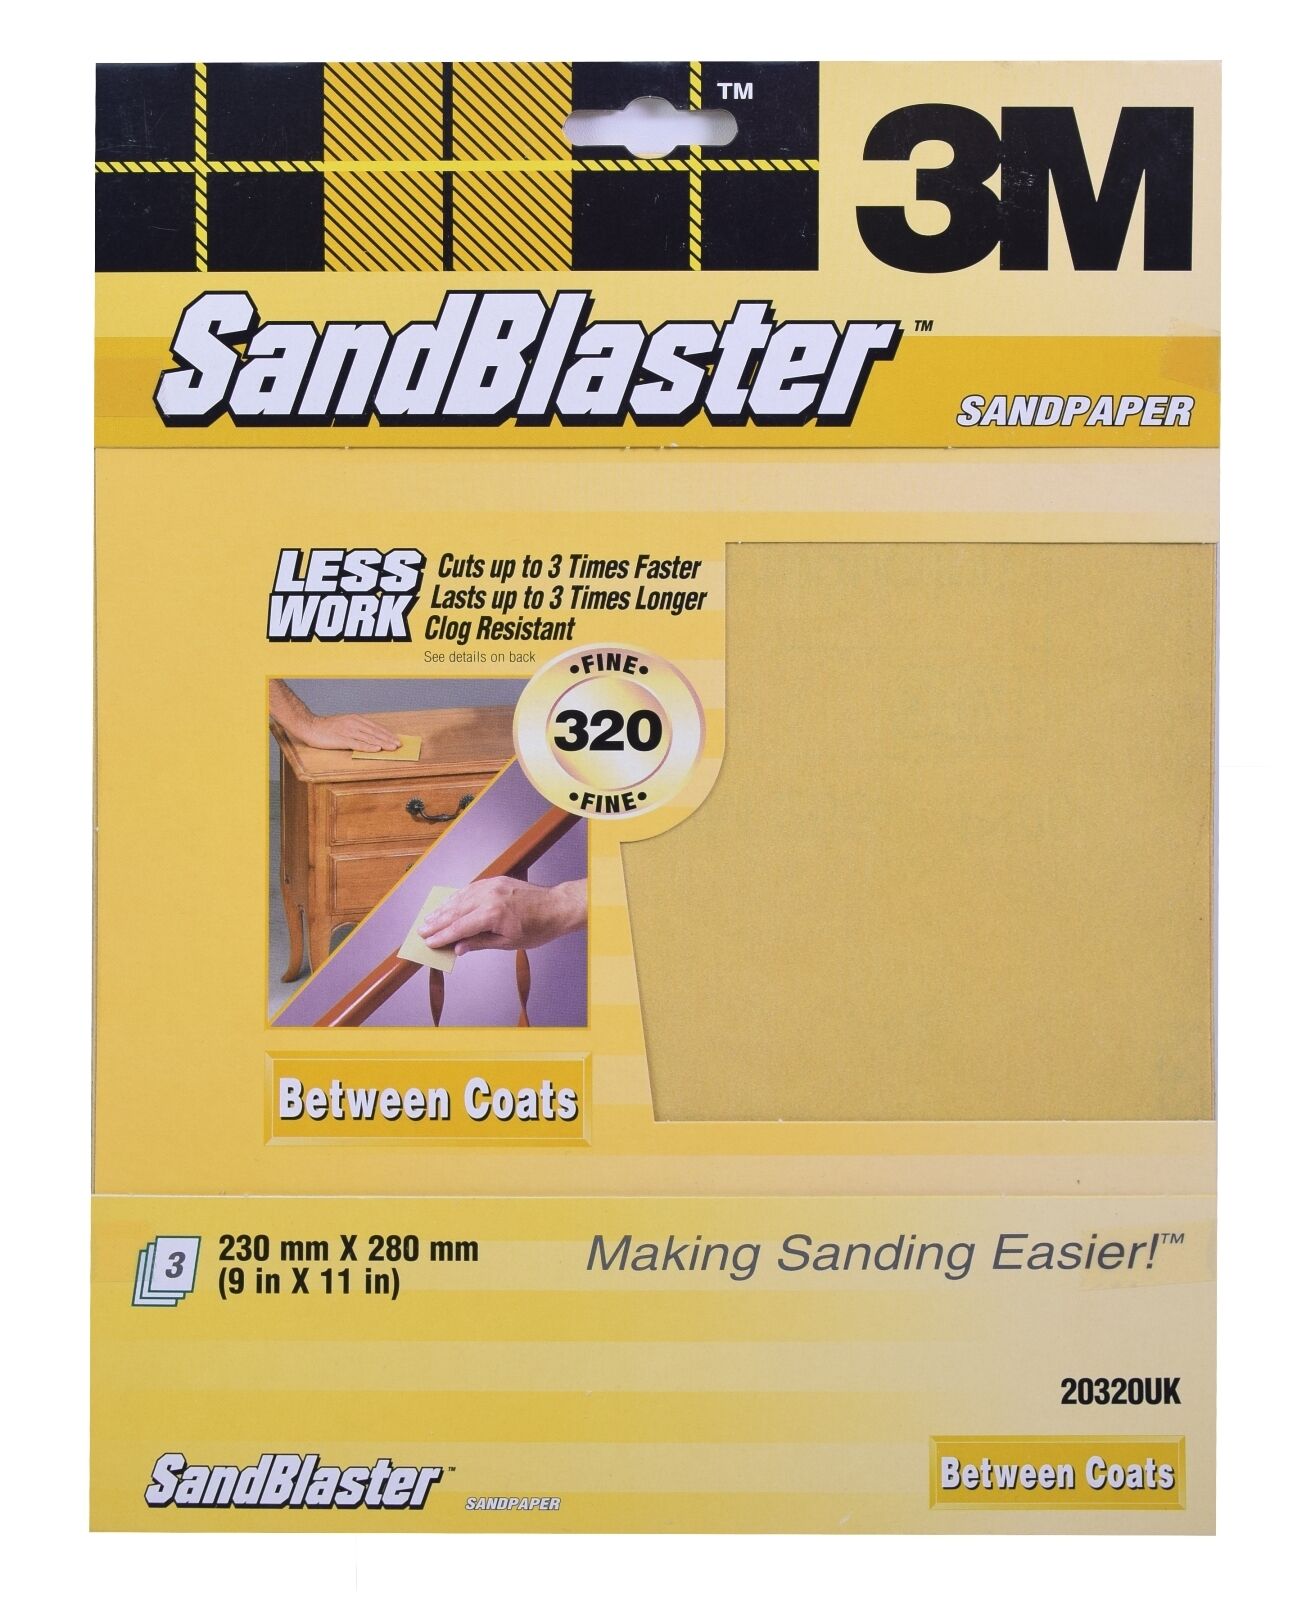 3M Sandblaster Sandpaper Sheets Paint Stripping, Bare Surfaces & Between Coats